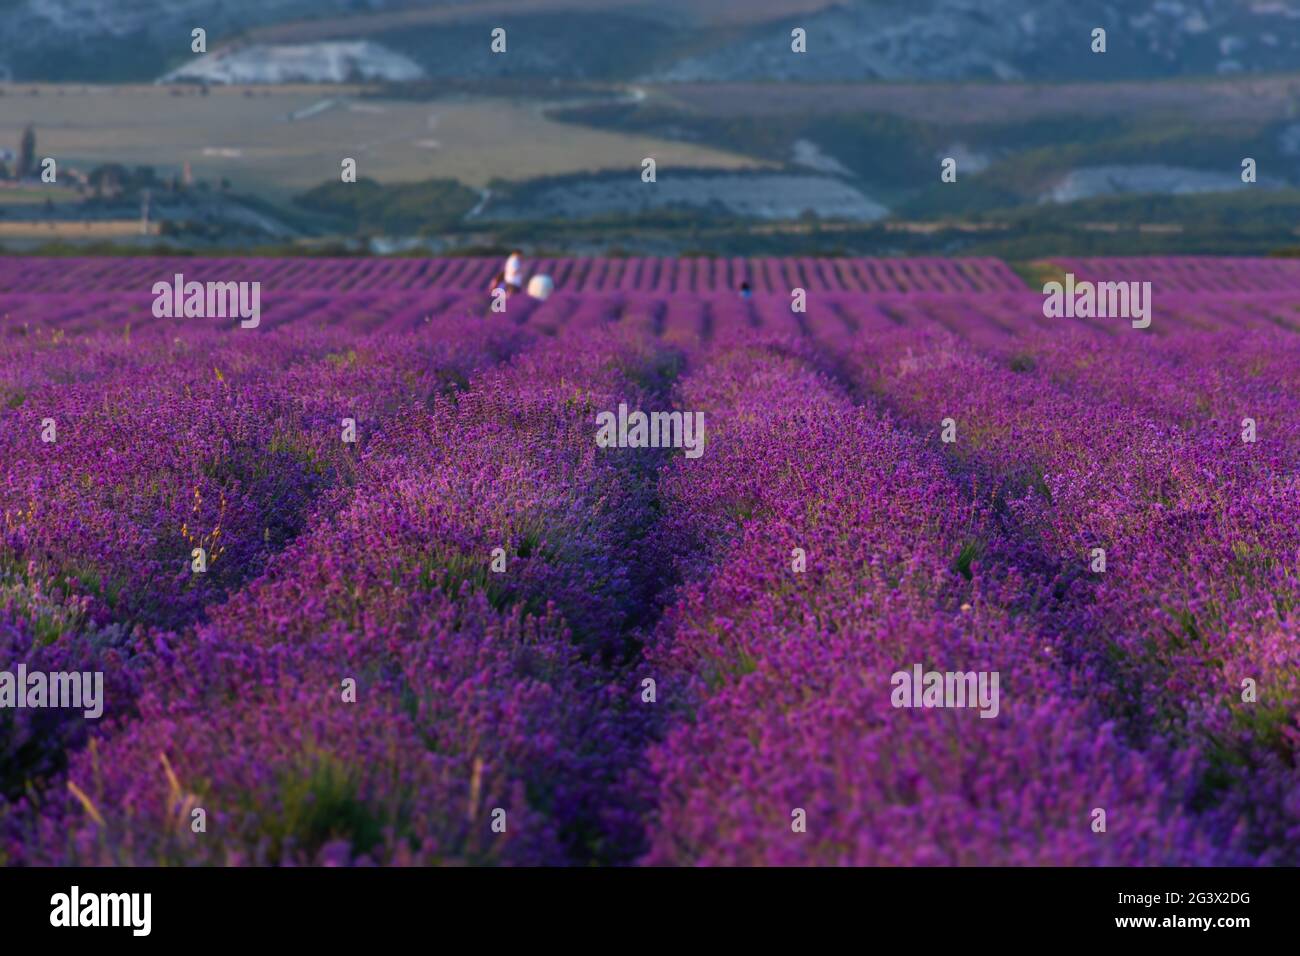 Lavender field at sunset. Blurry abstract background with people taking pictures. Purple rows of lavender. Atmospheric summer landscape. Growing laven Stock Photo